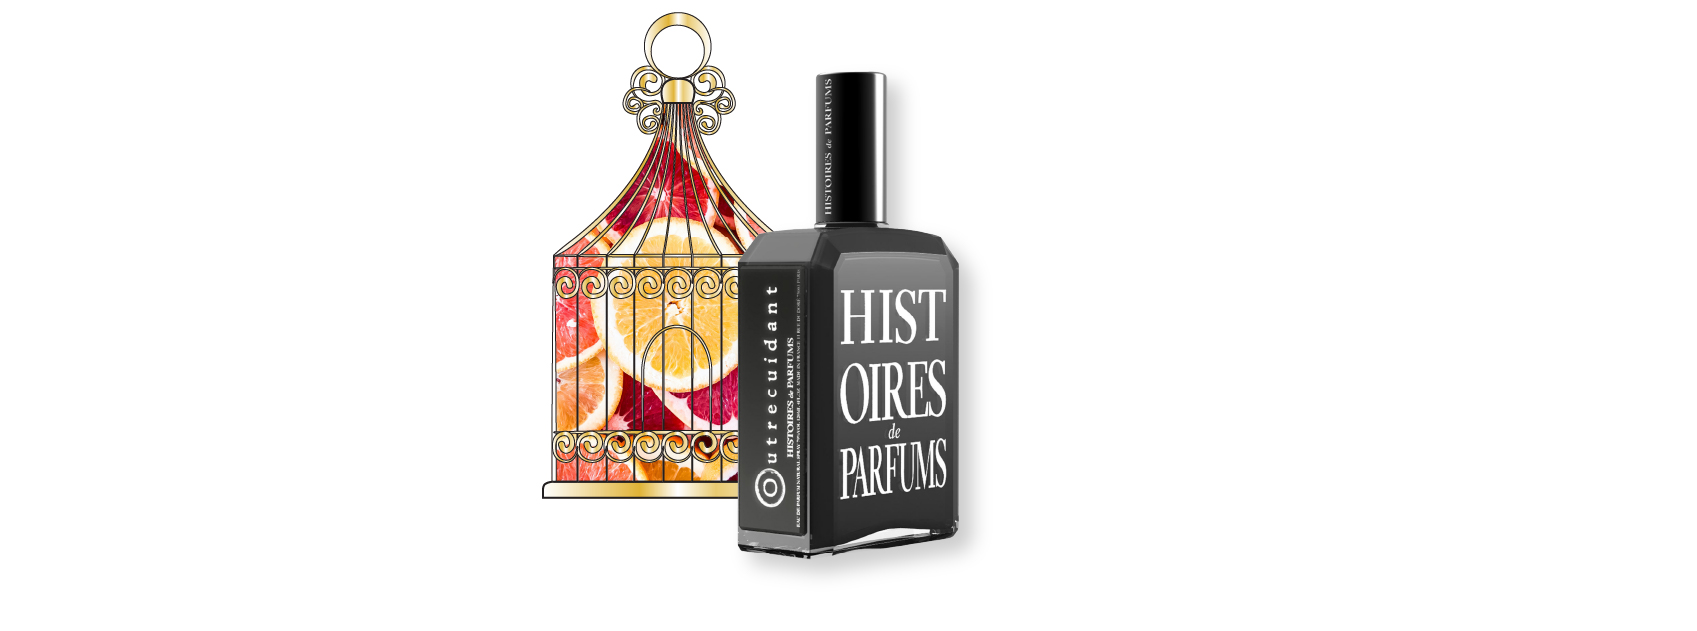 botte of outrecuidant by histoires de parfumes with a photo of grapefruit behind a golden cage